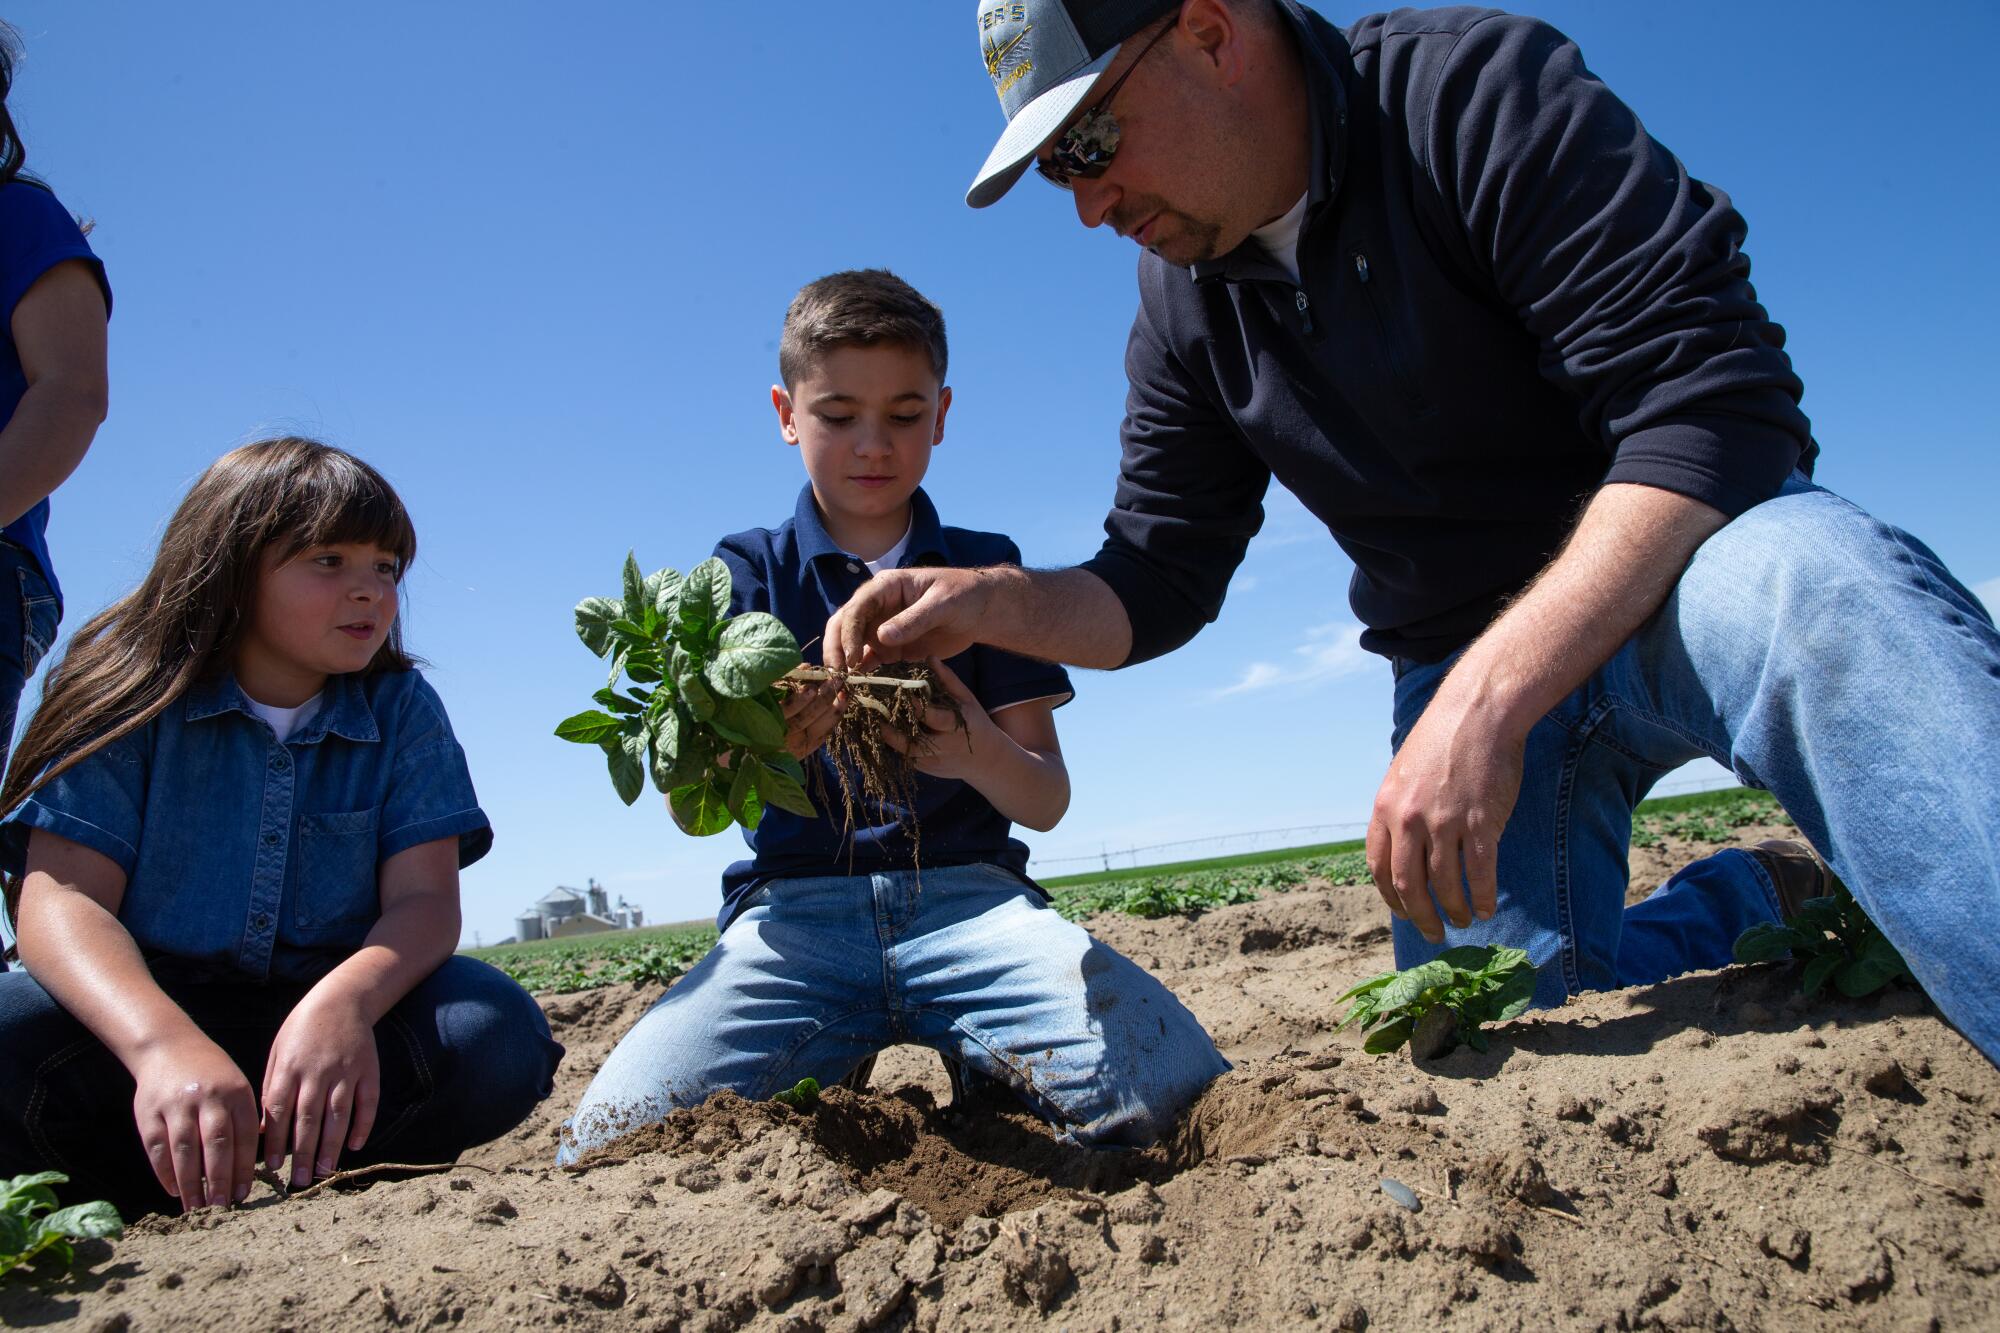 Farmer Jordan Reed, shows his children Addison, left, and Owen how to check the moisture in the soil of a young potato plant in a neighbor's field in Pasco, Wash.